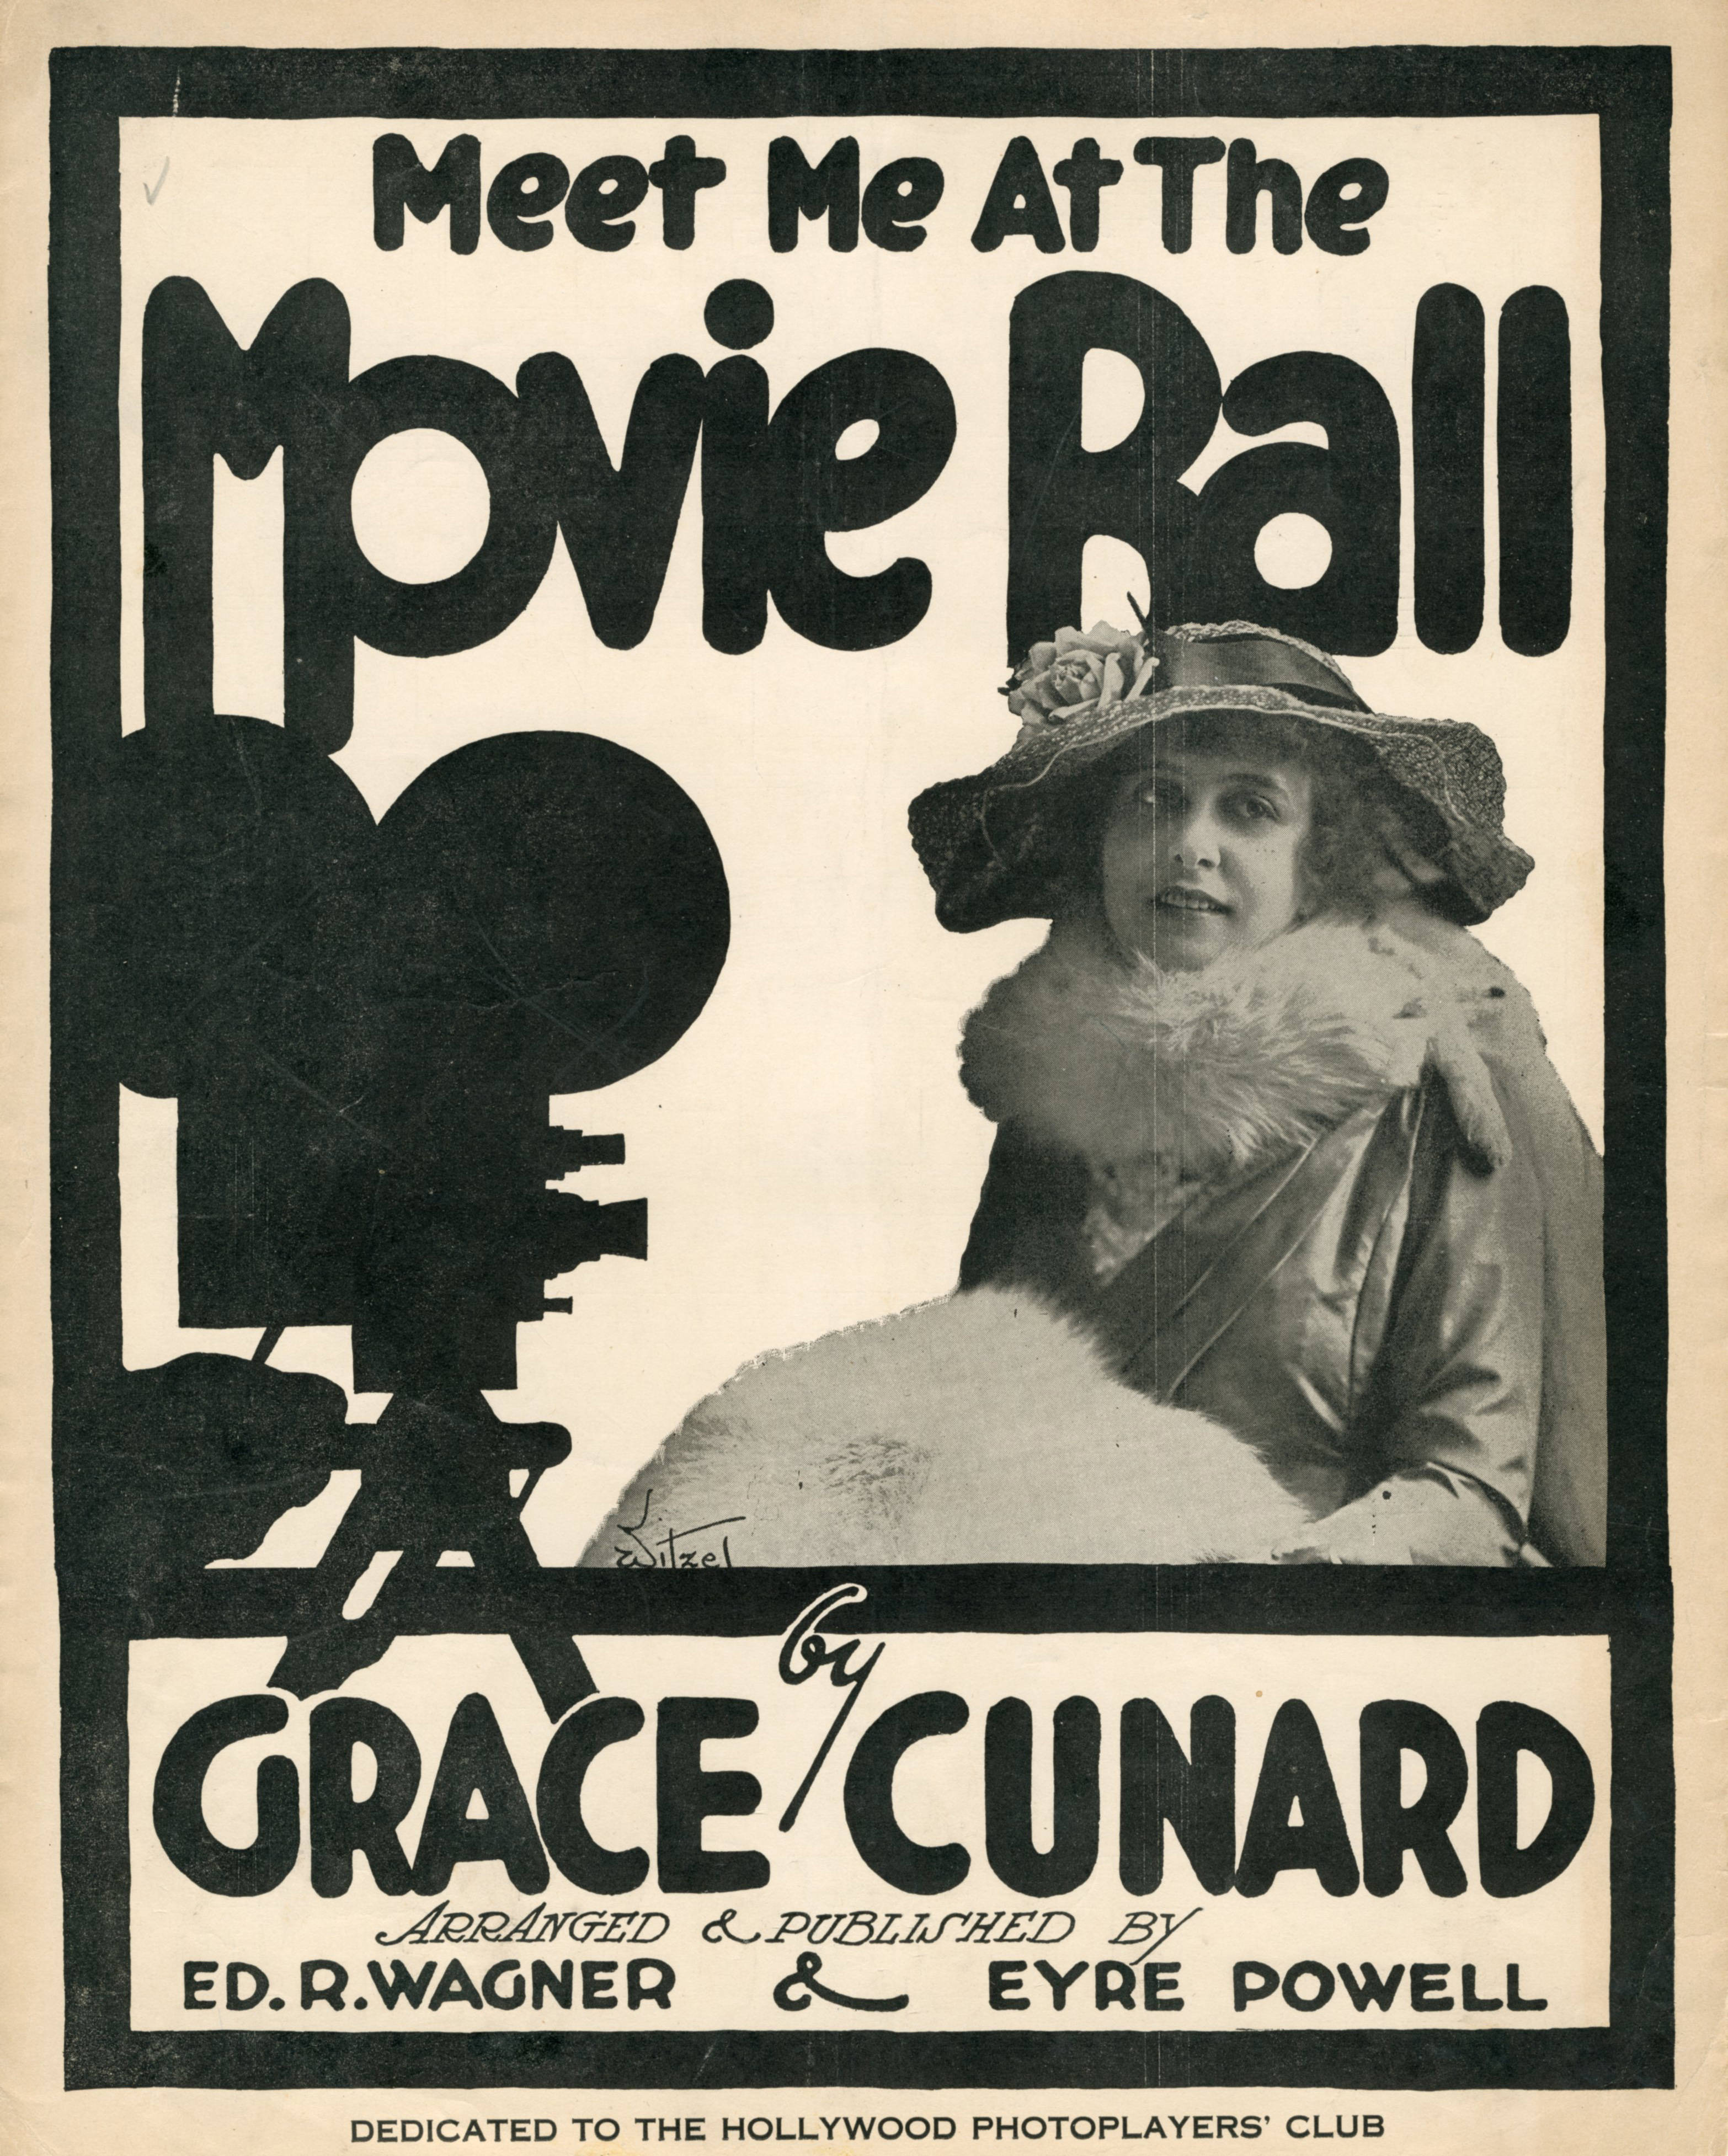 Sheet music cover - MEET ME AT THE MOVIE BALL (1916)